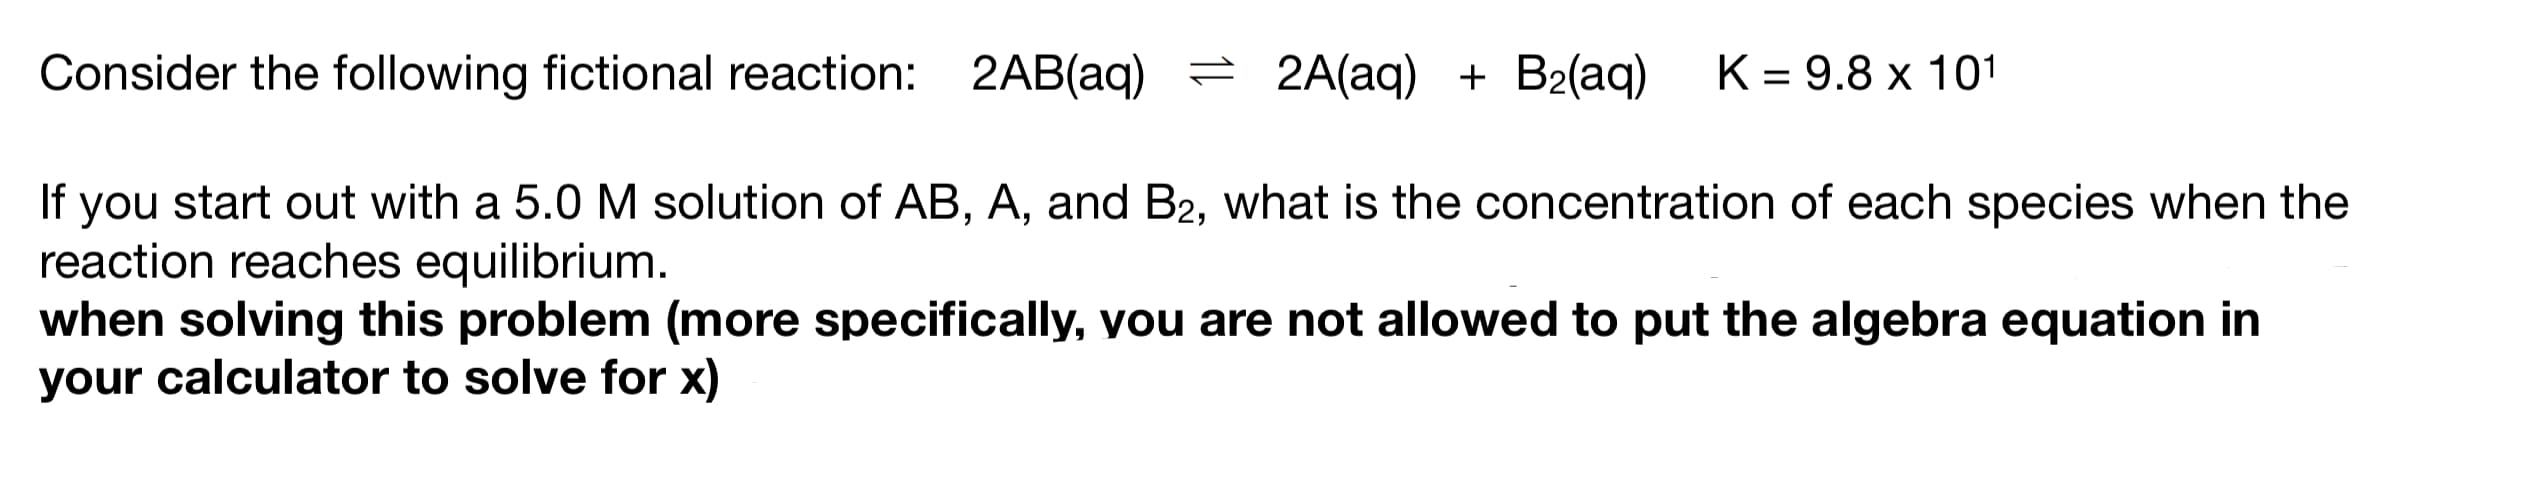 Consider the following fictional reaction: 2AB(aq) = 2A(aq) + B2(aq)
K = 9.8 x 101
%3D
If you start out with a 5.0 M solution of AB, A, and B2, what is the concentration of each species when the
reaction reaches equilibrium.
when solving this problem (more specifically, you are not allowed to put the algebra equation in
your calculator to solve for x)
